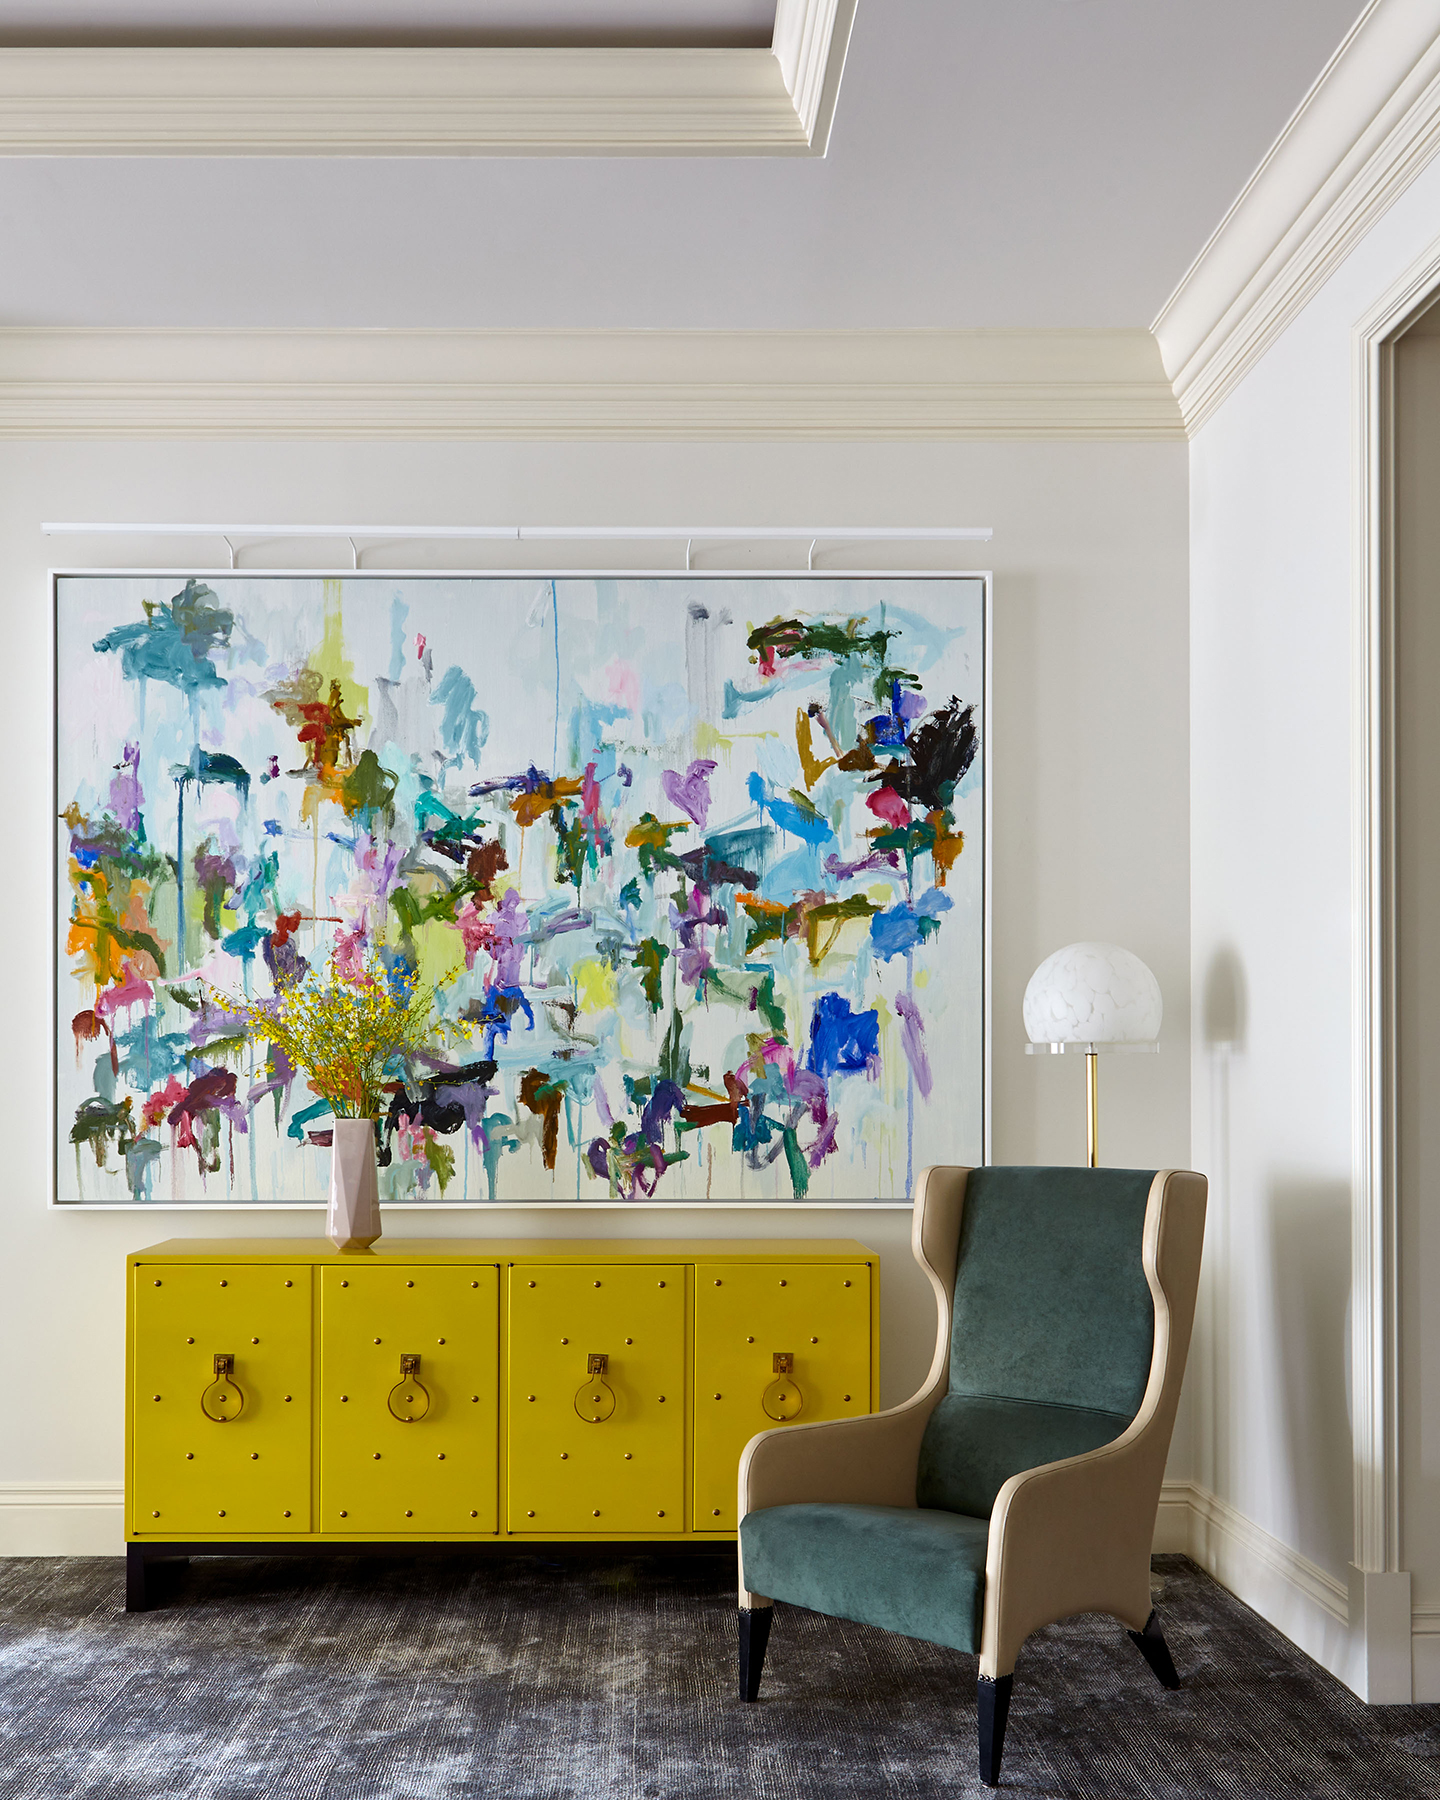 "Bicolored Reading Armchair next to a Mustard-Colored Chest of Drawers and a Huge Vibrant Abstract Painting "